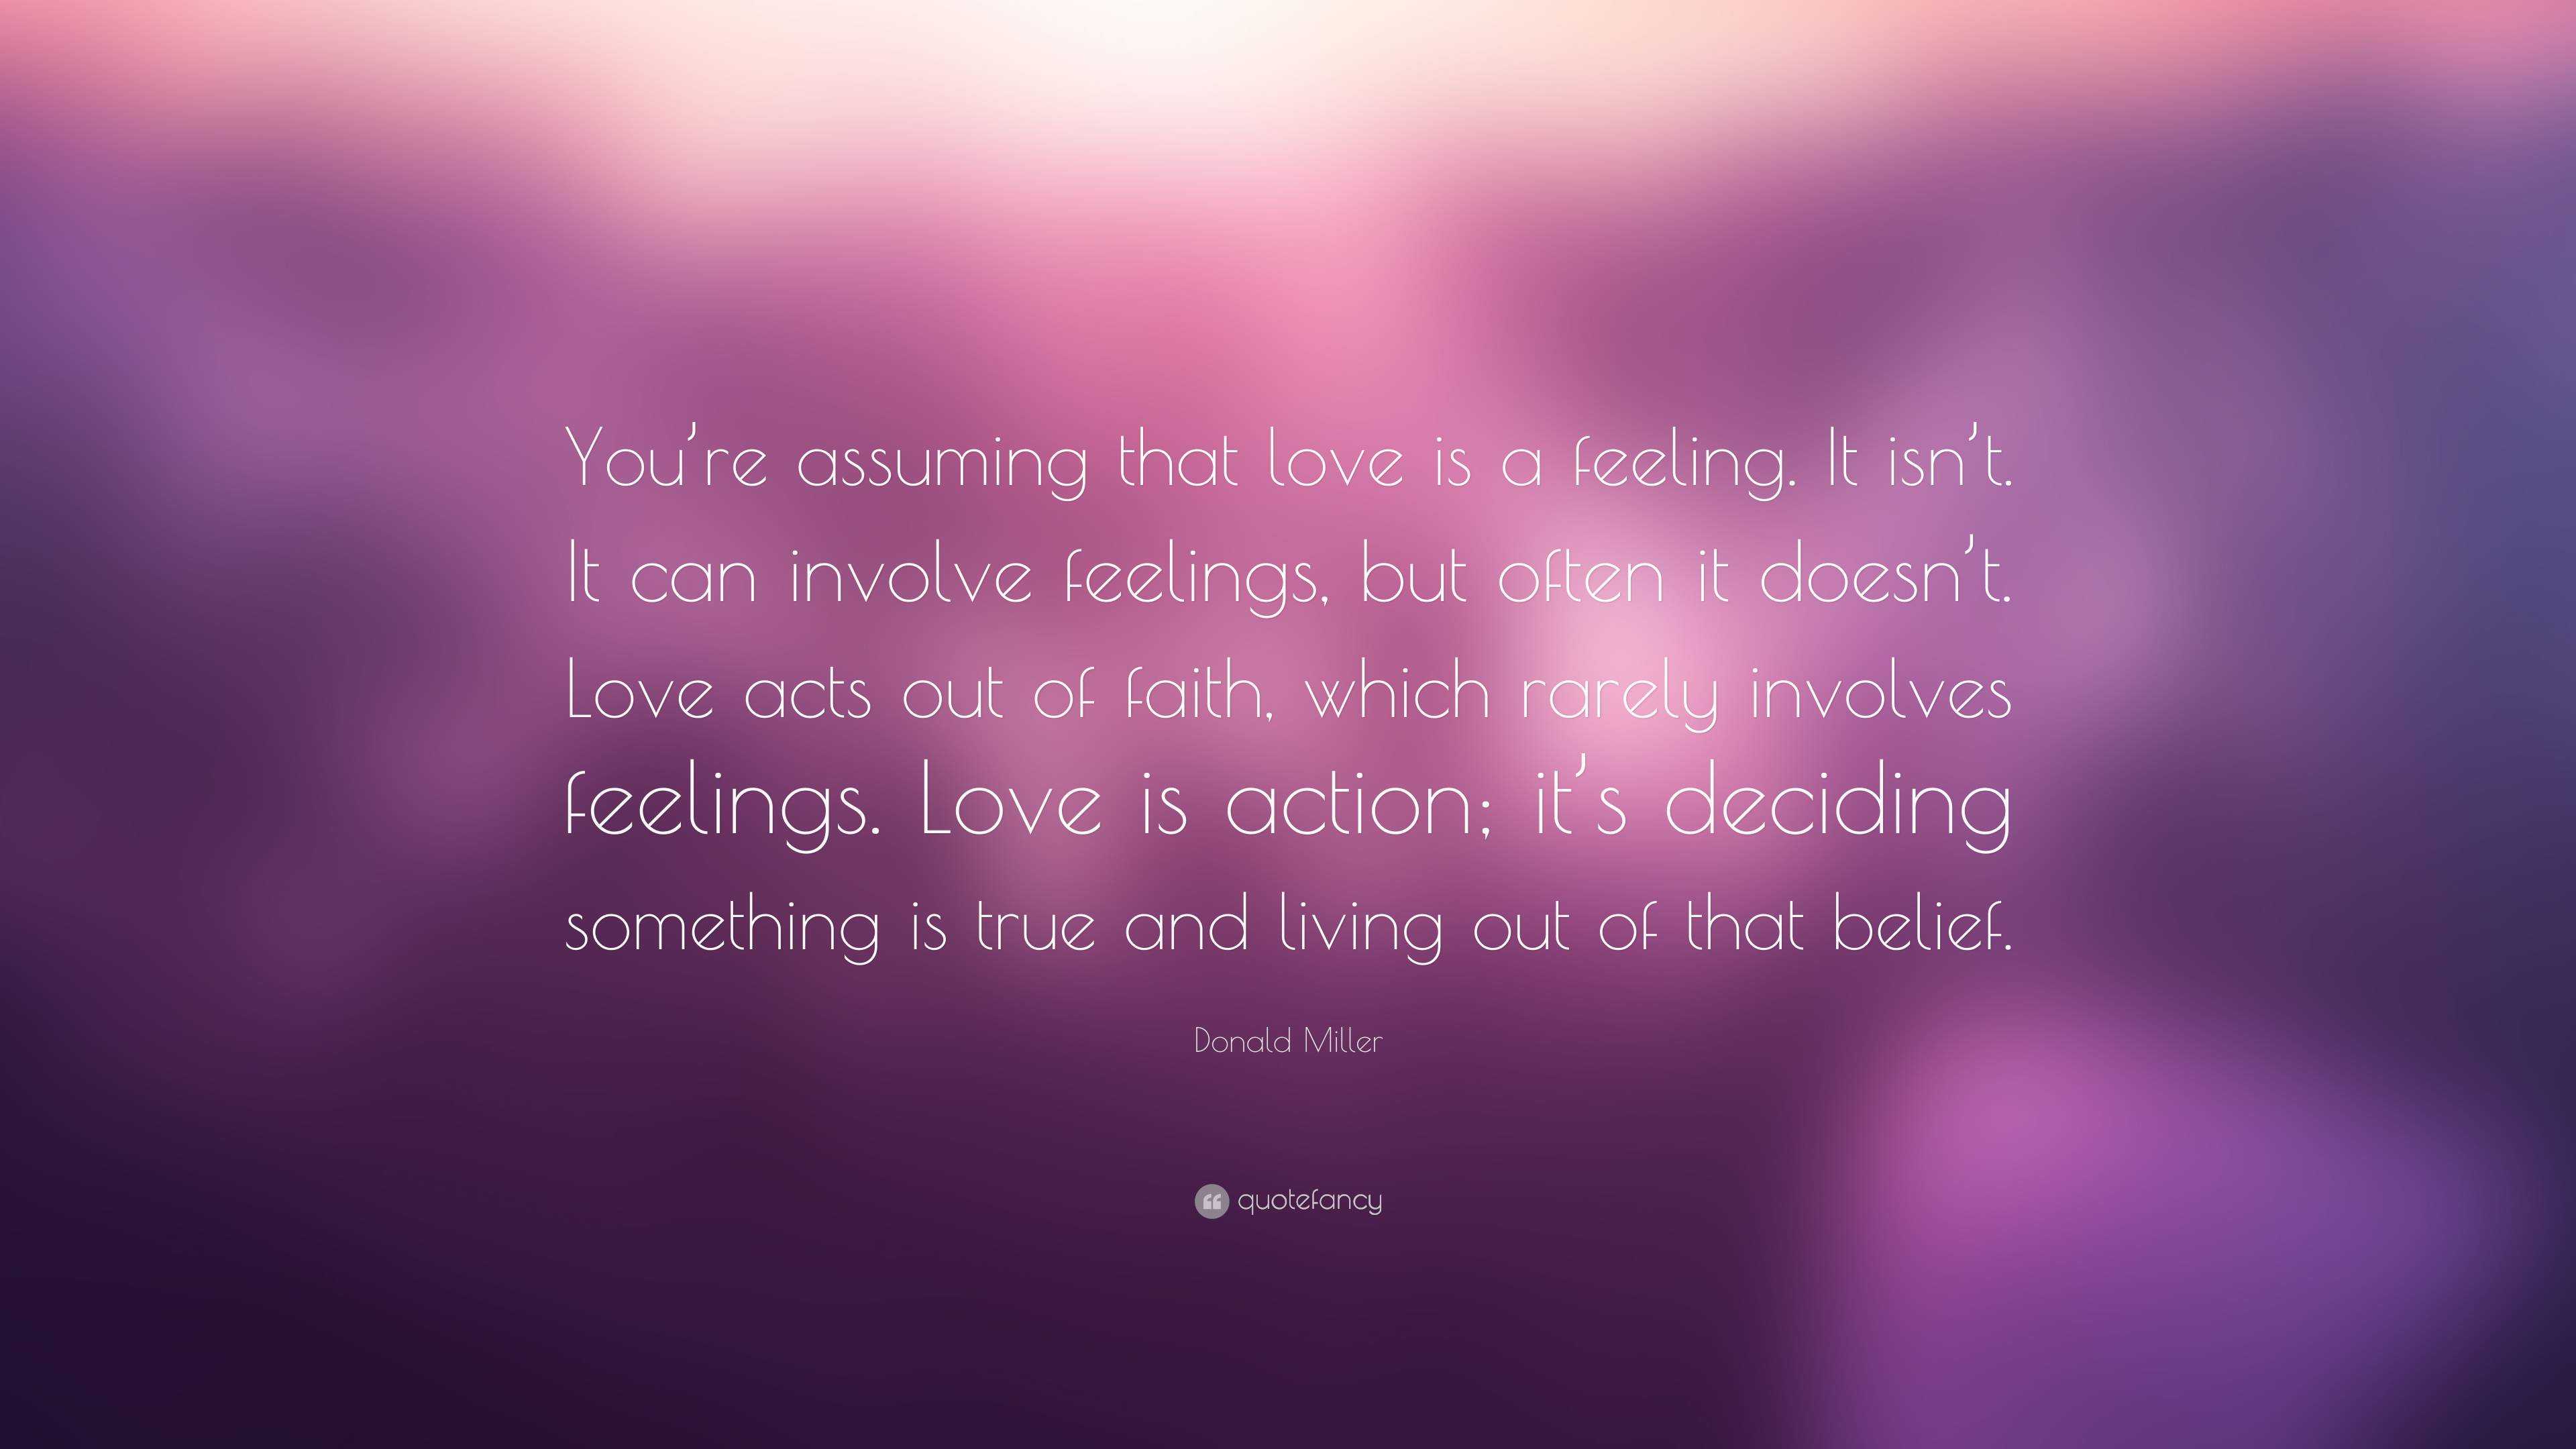 Donald Miller Quote: “You’re assuming that love is a feeling. It isn’t ...